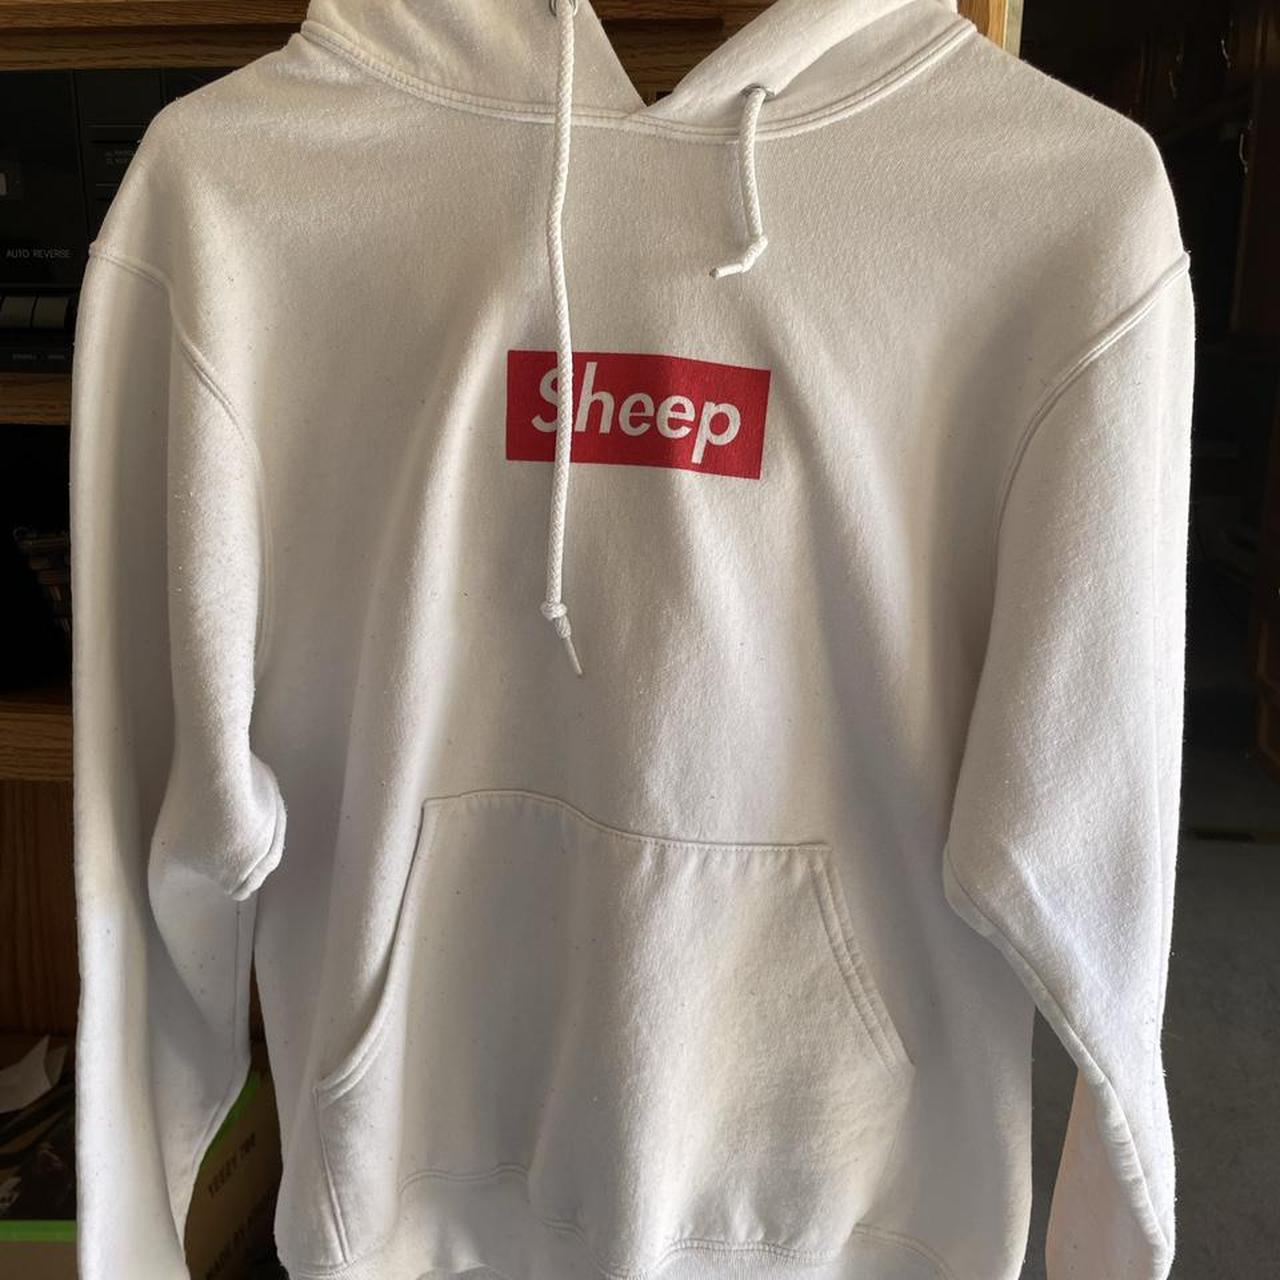 køber fax ozon Men's White and Red Hoodie | Depop